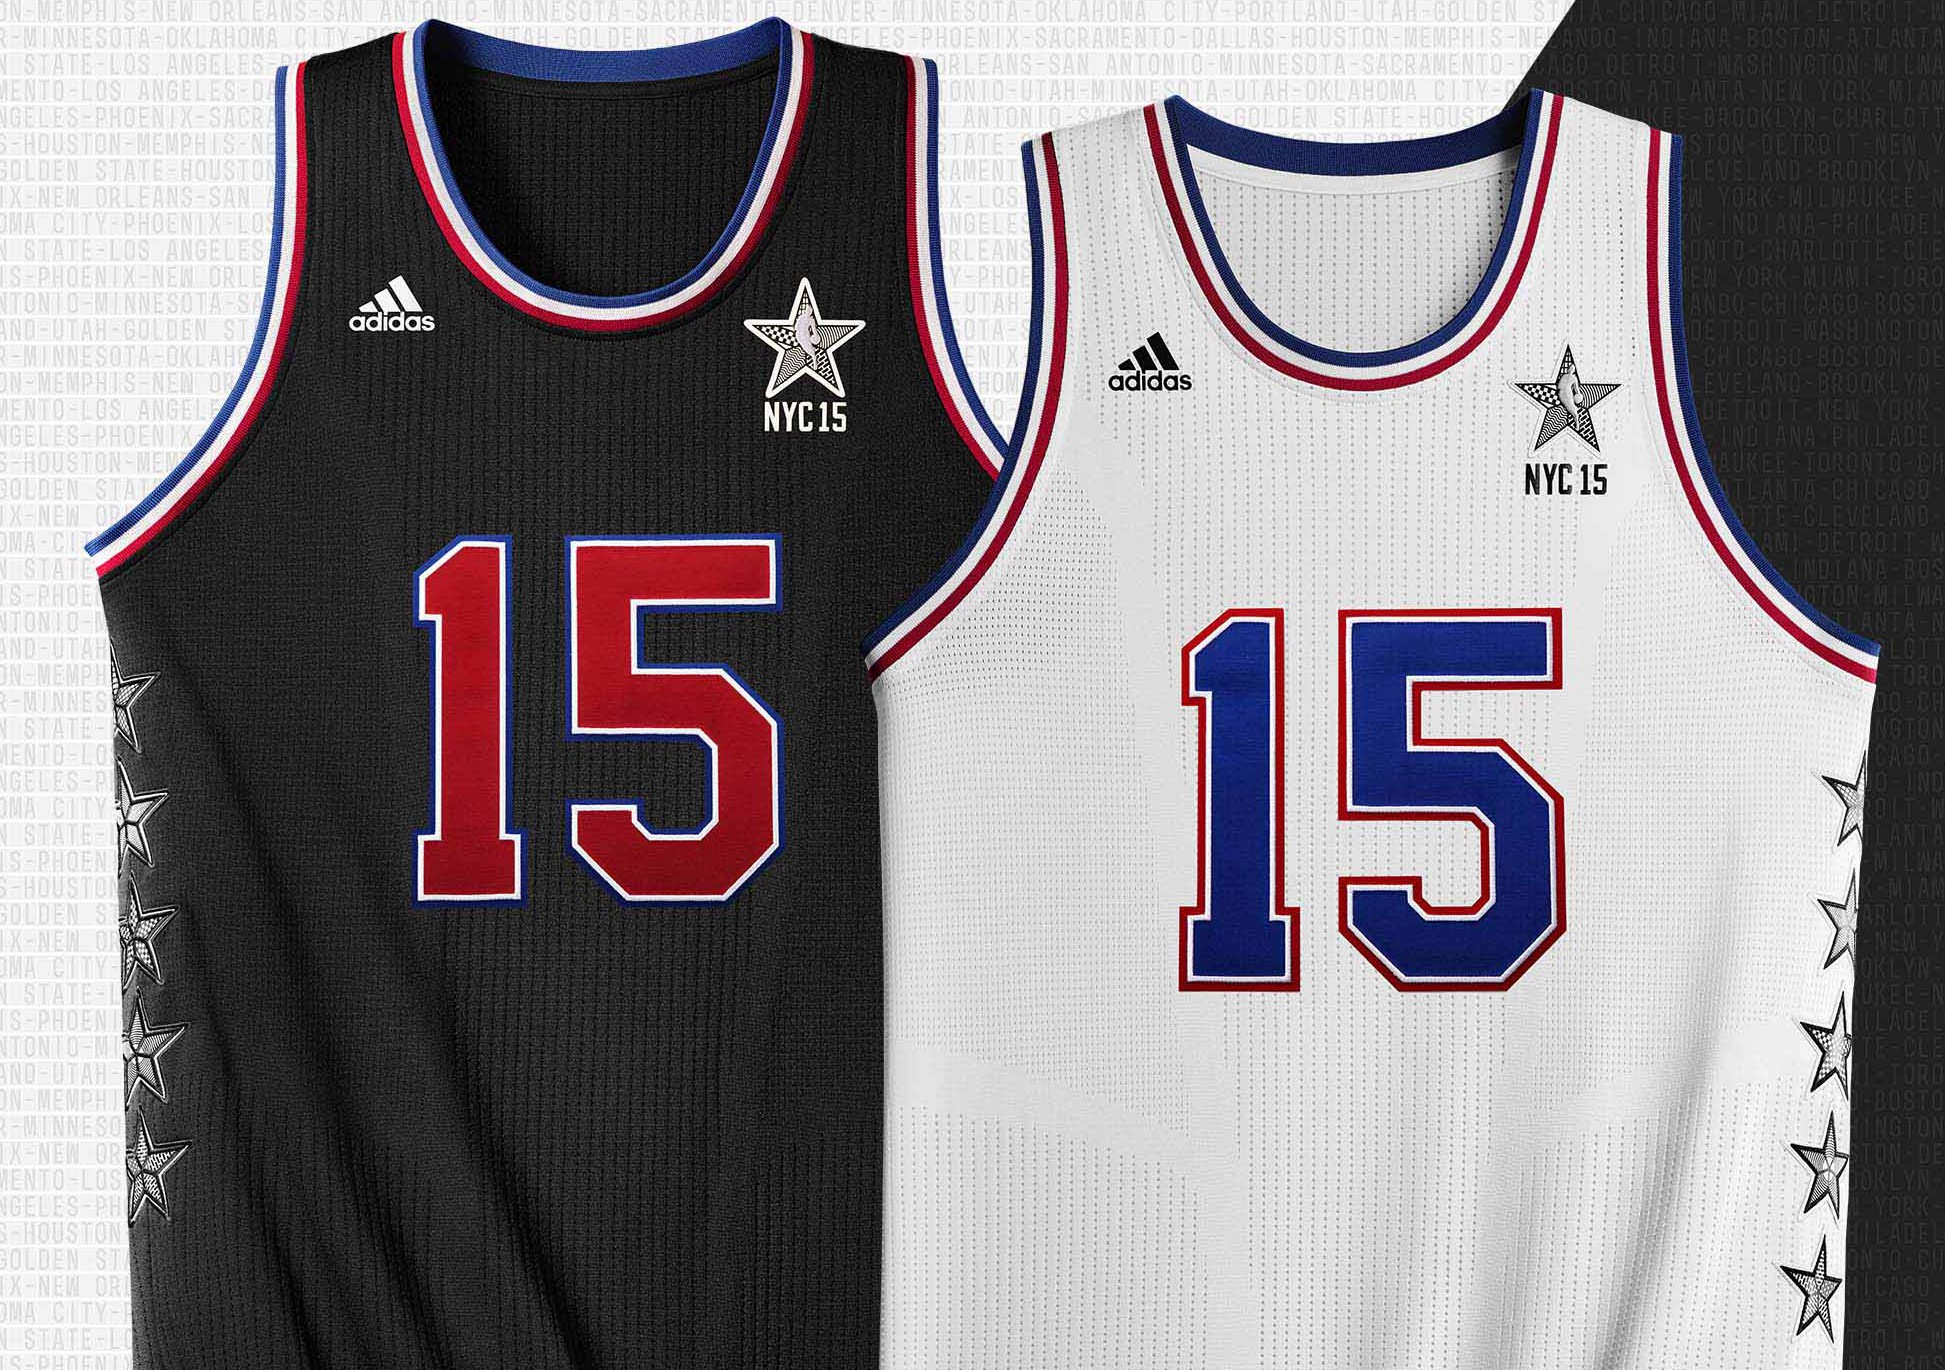 NBA All-Star Game uniforms throughout the years